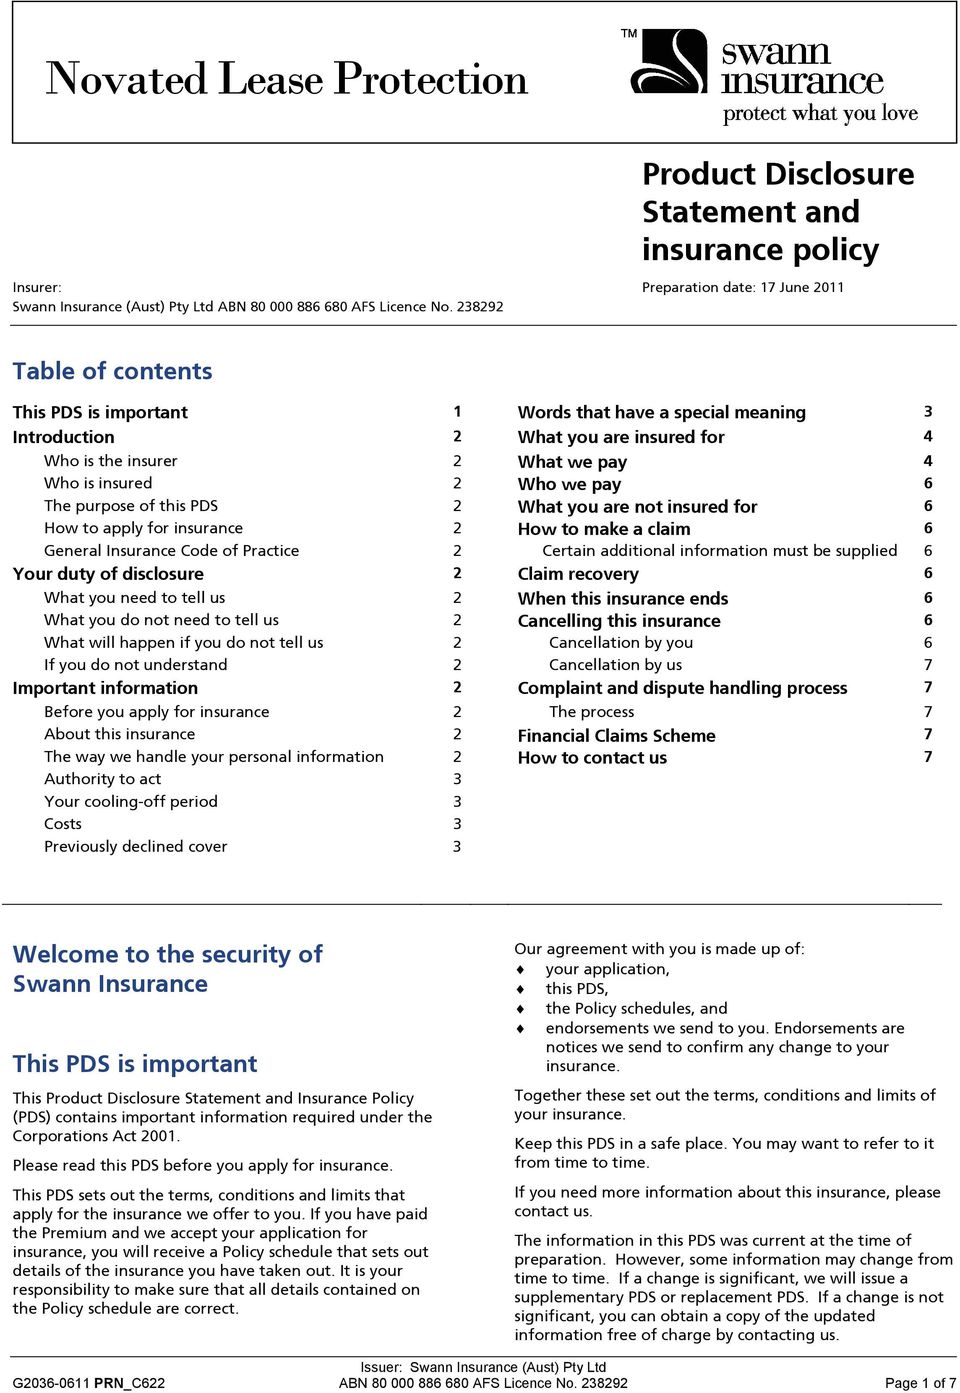 purpose of this PDS 2 What you are not insured for 6 How to apply for insurance 2 How to make a claim 6 General Insurance Code of Practice 2 Certain additional information must be supplied 6 Your